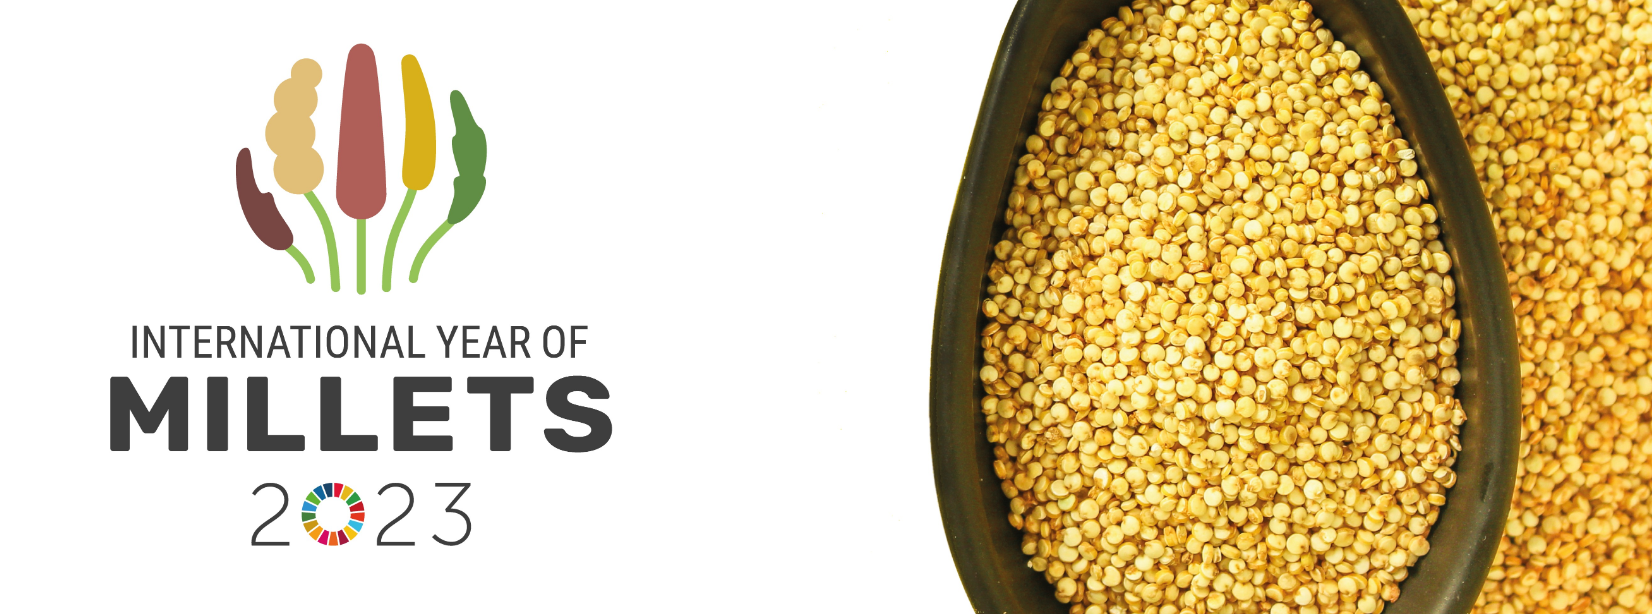 International Year of Millets 2023 Unleashing the potential of millets